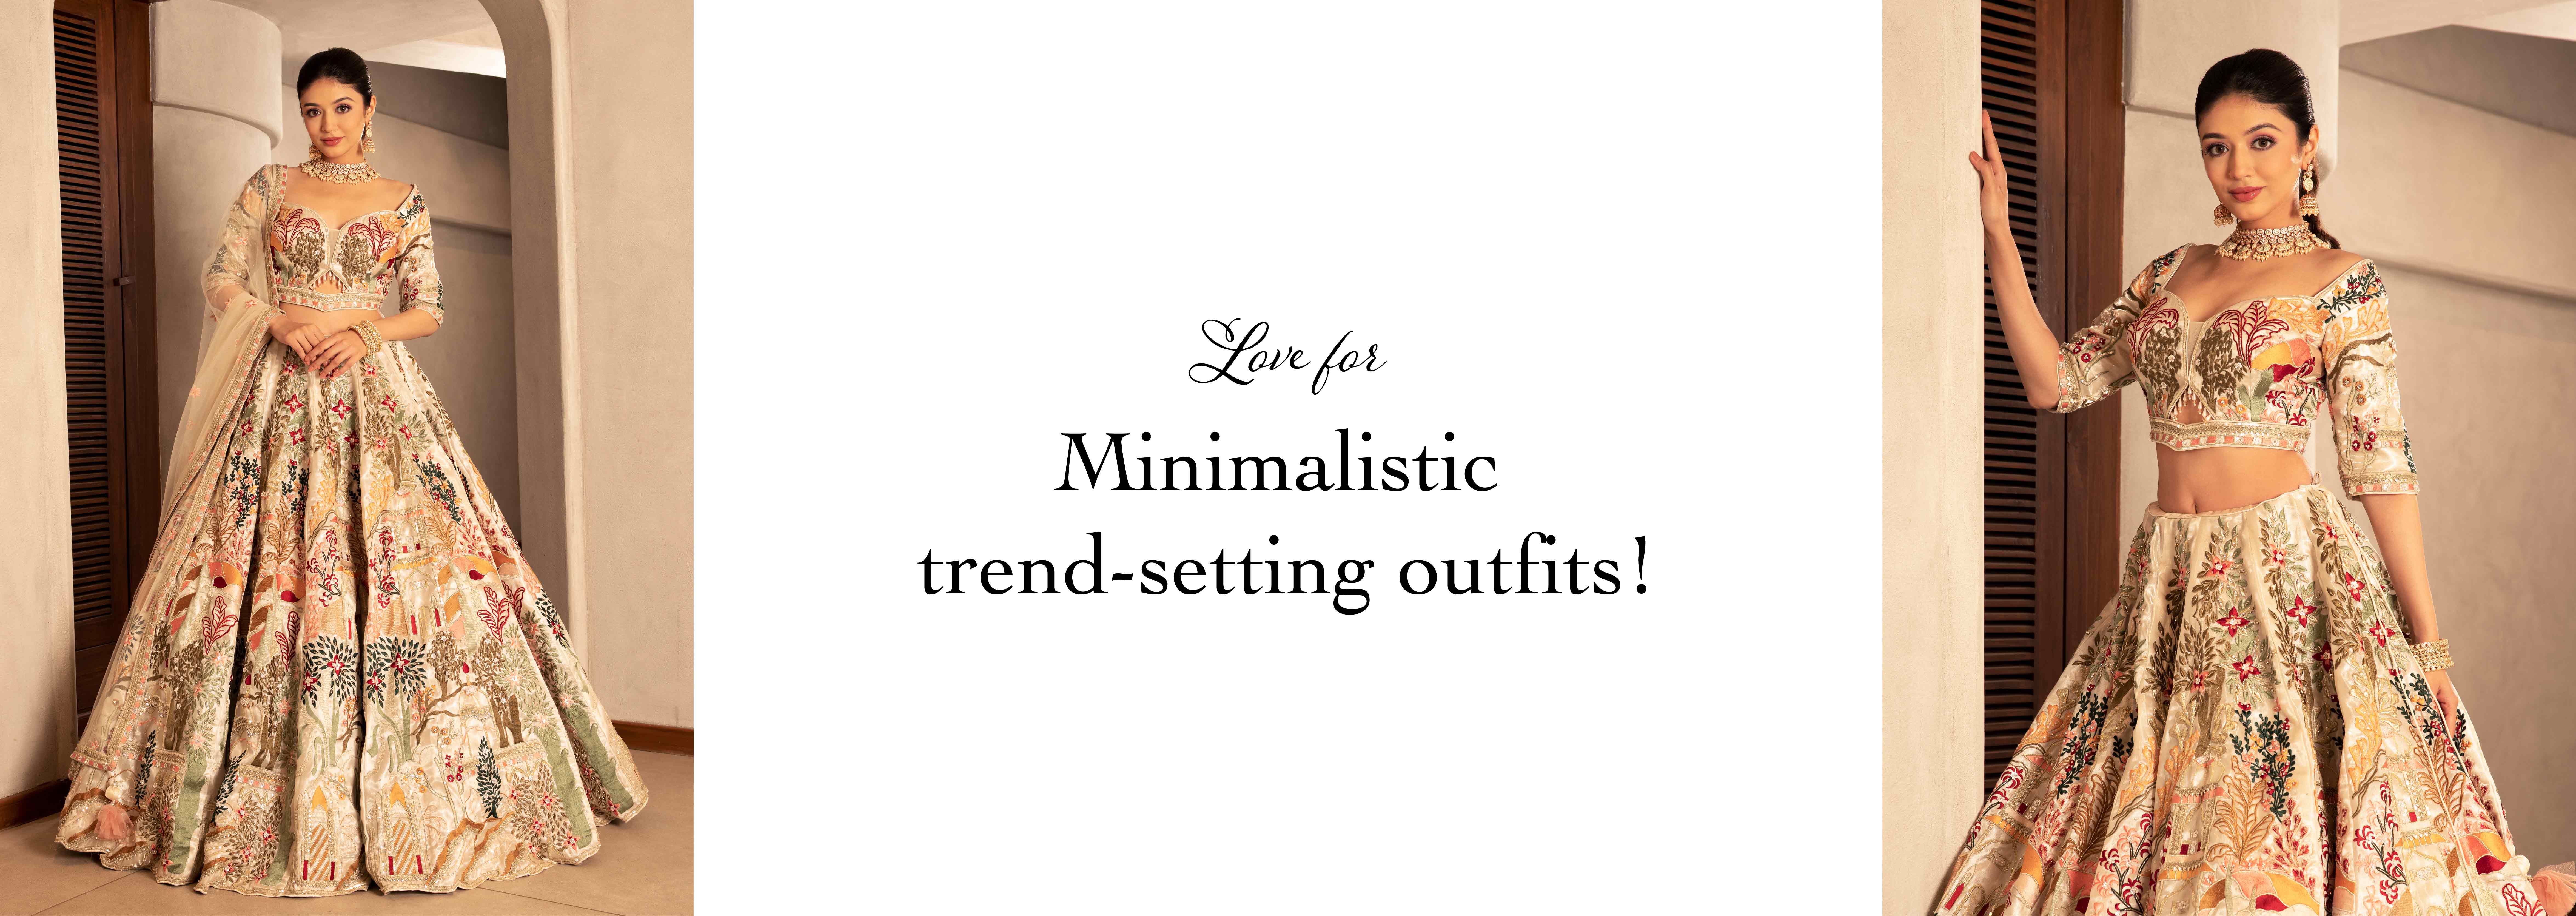 minimalstic trend-setting outfits